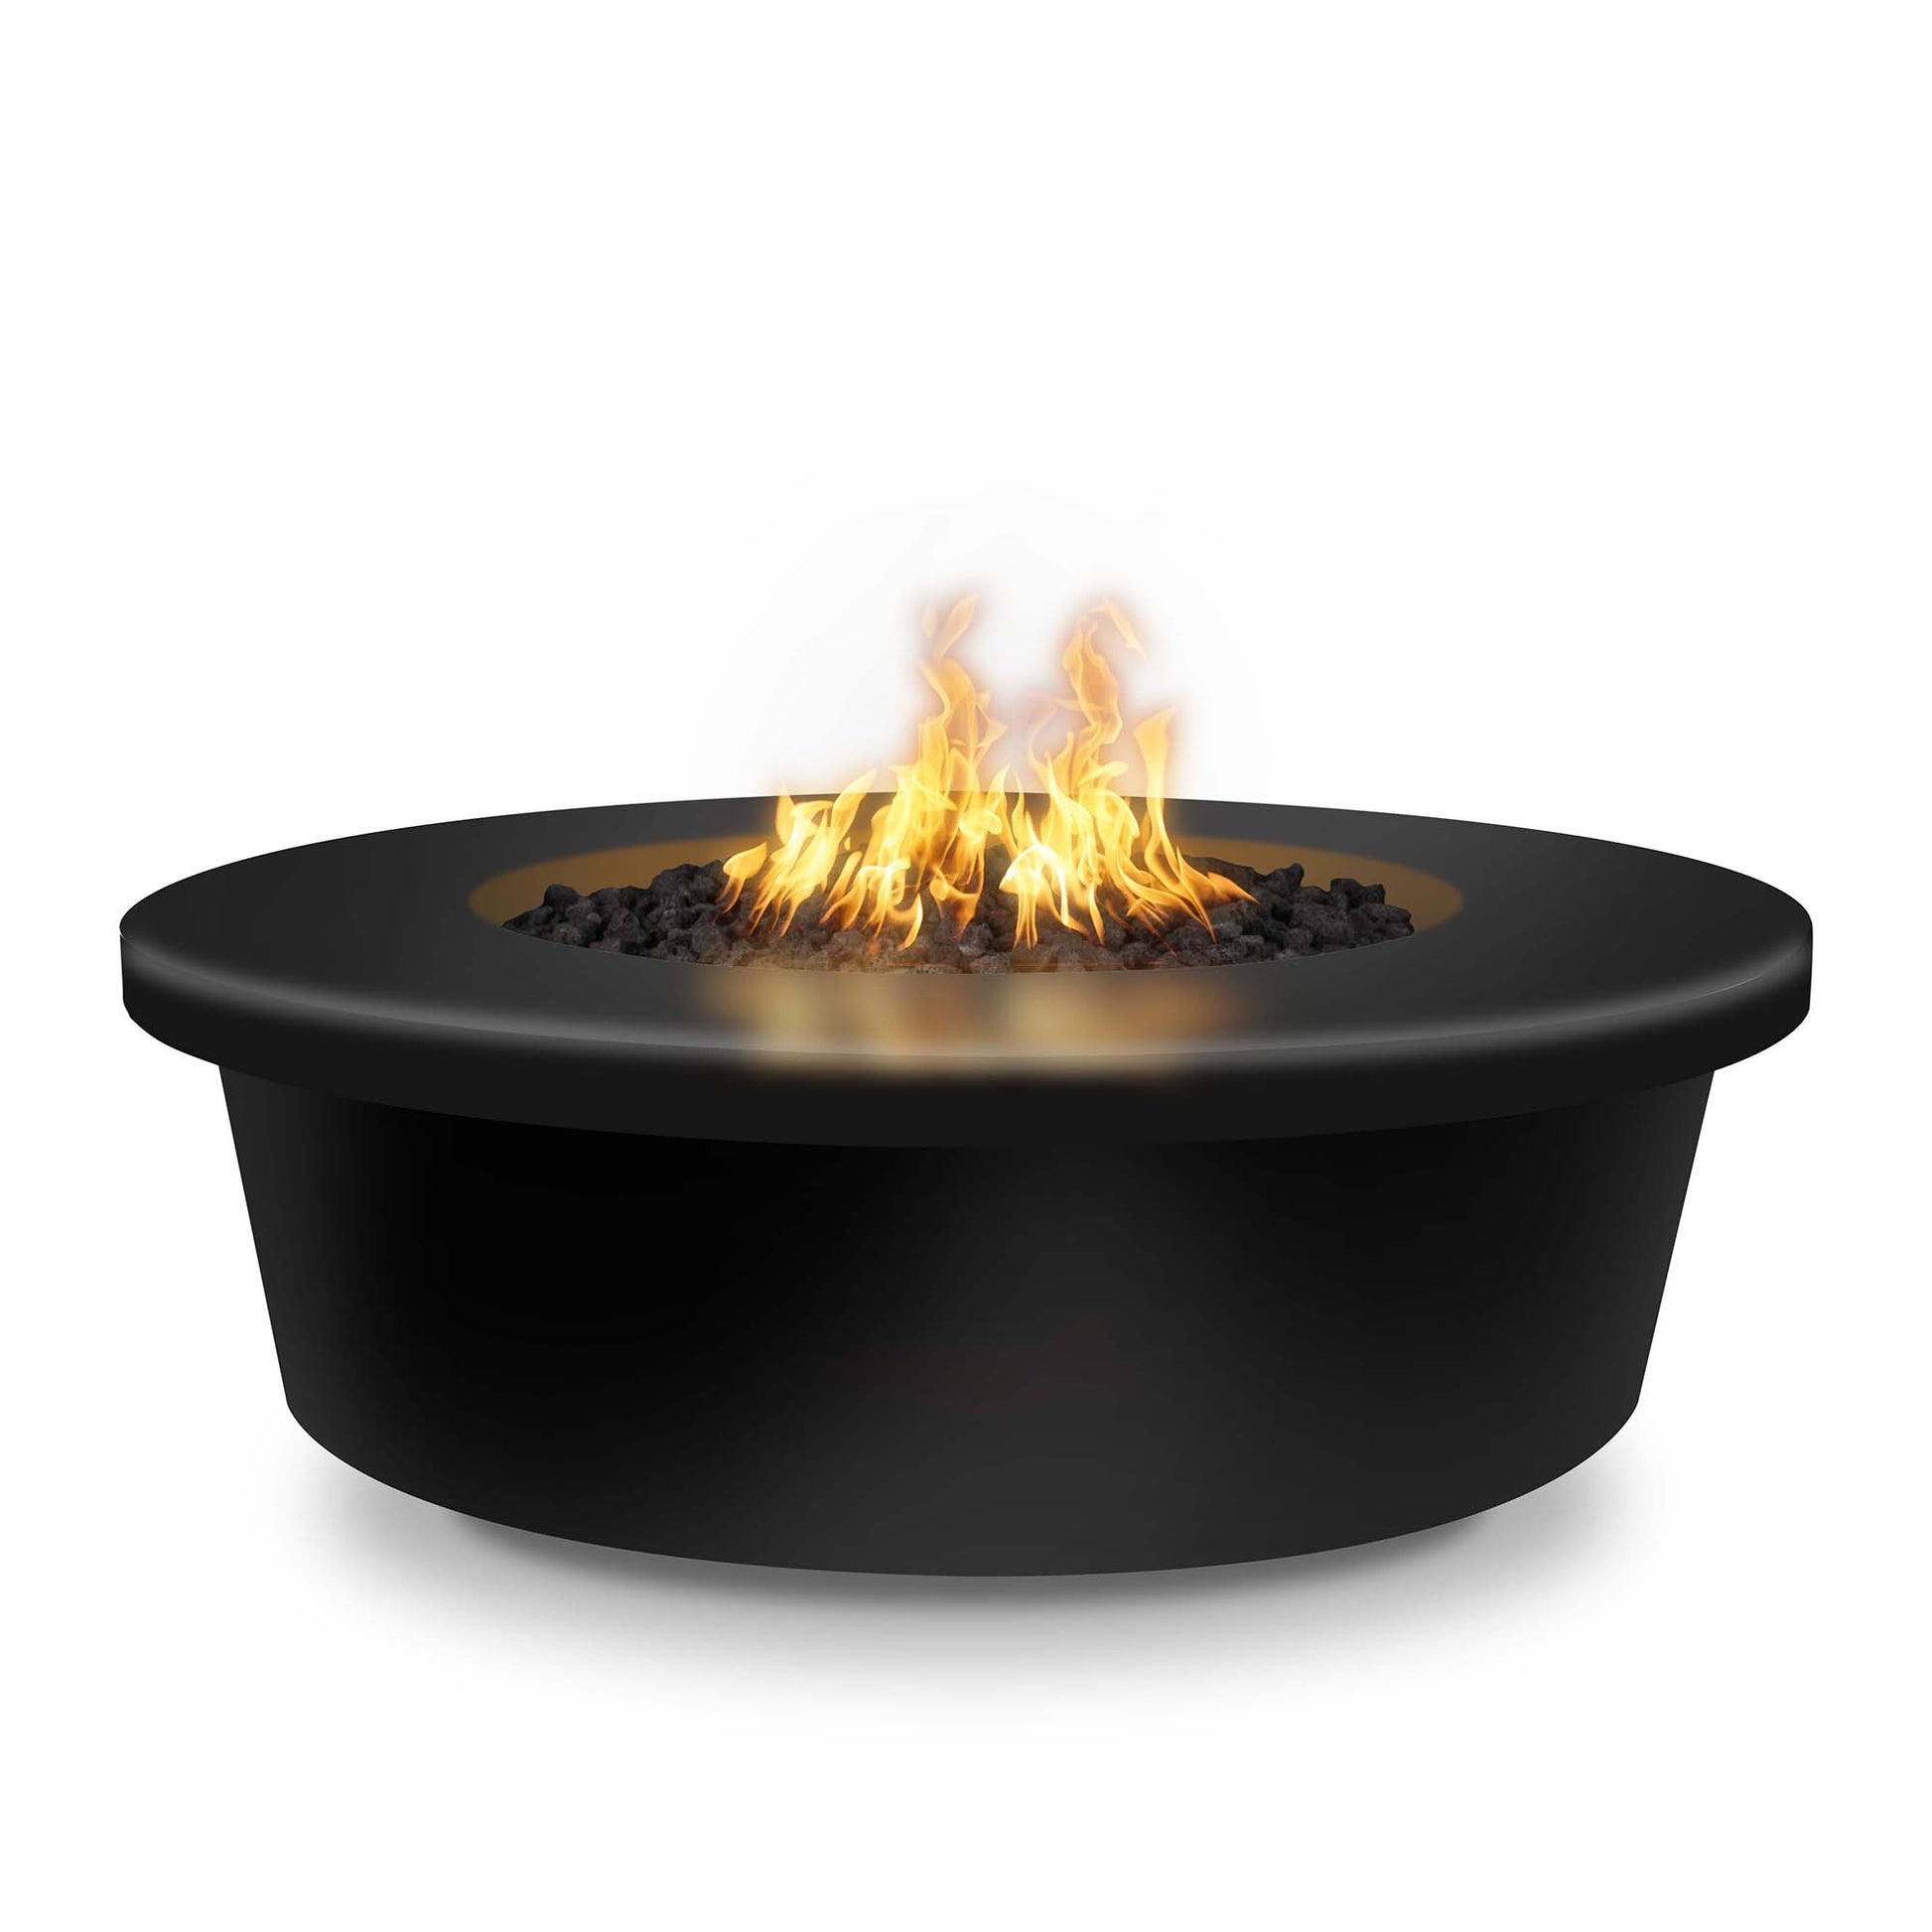 The Outdoor Plus Round Tempe 48" Stainless Steel Liquid Propane Fire Pit with 12V Electronic Ignition